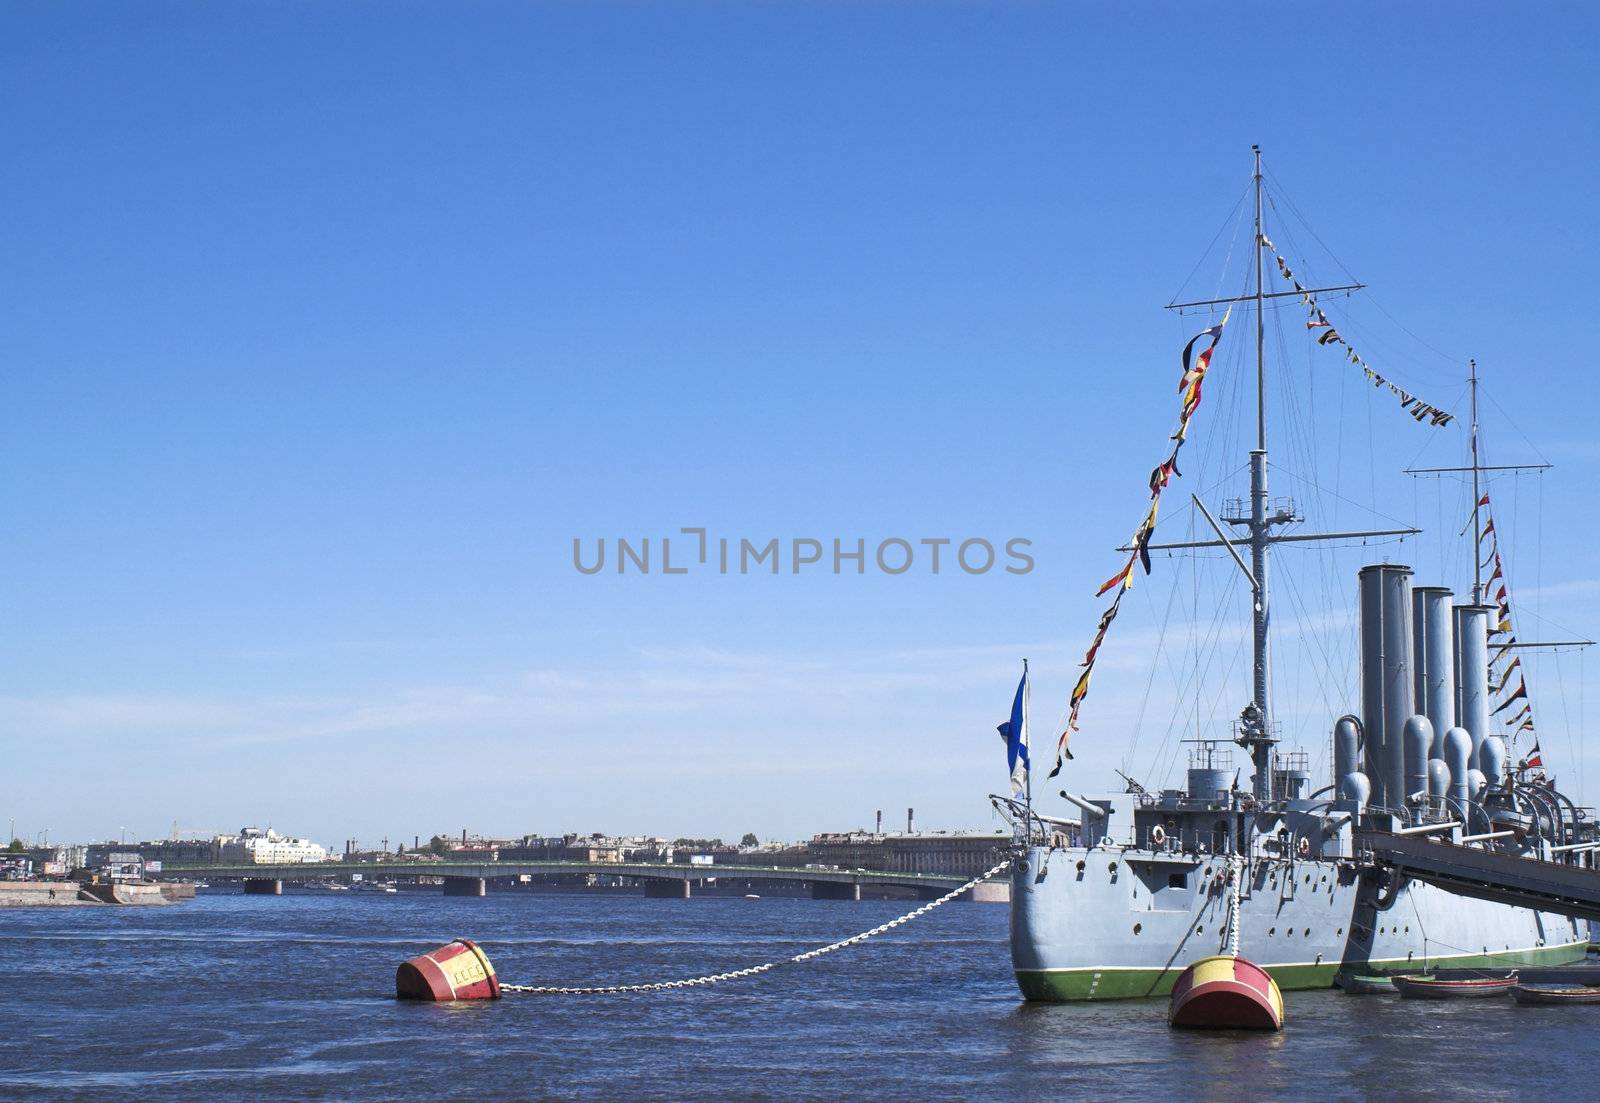 The stern part of famous cruiser Aurora (relating to the Russian October 1917 revolution) now docked for ever as a museum at Petrogradskaya embankment opposite the Nakhimovskoi Naval School in Saint Petersburg. (The ship name is erased in the image.)